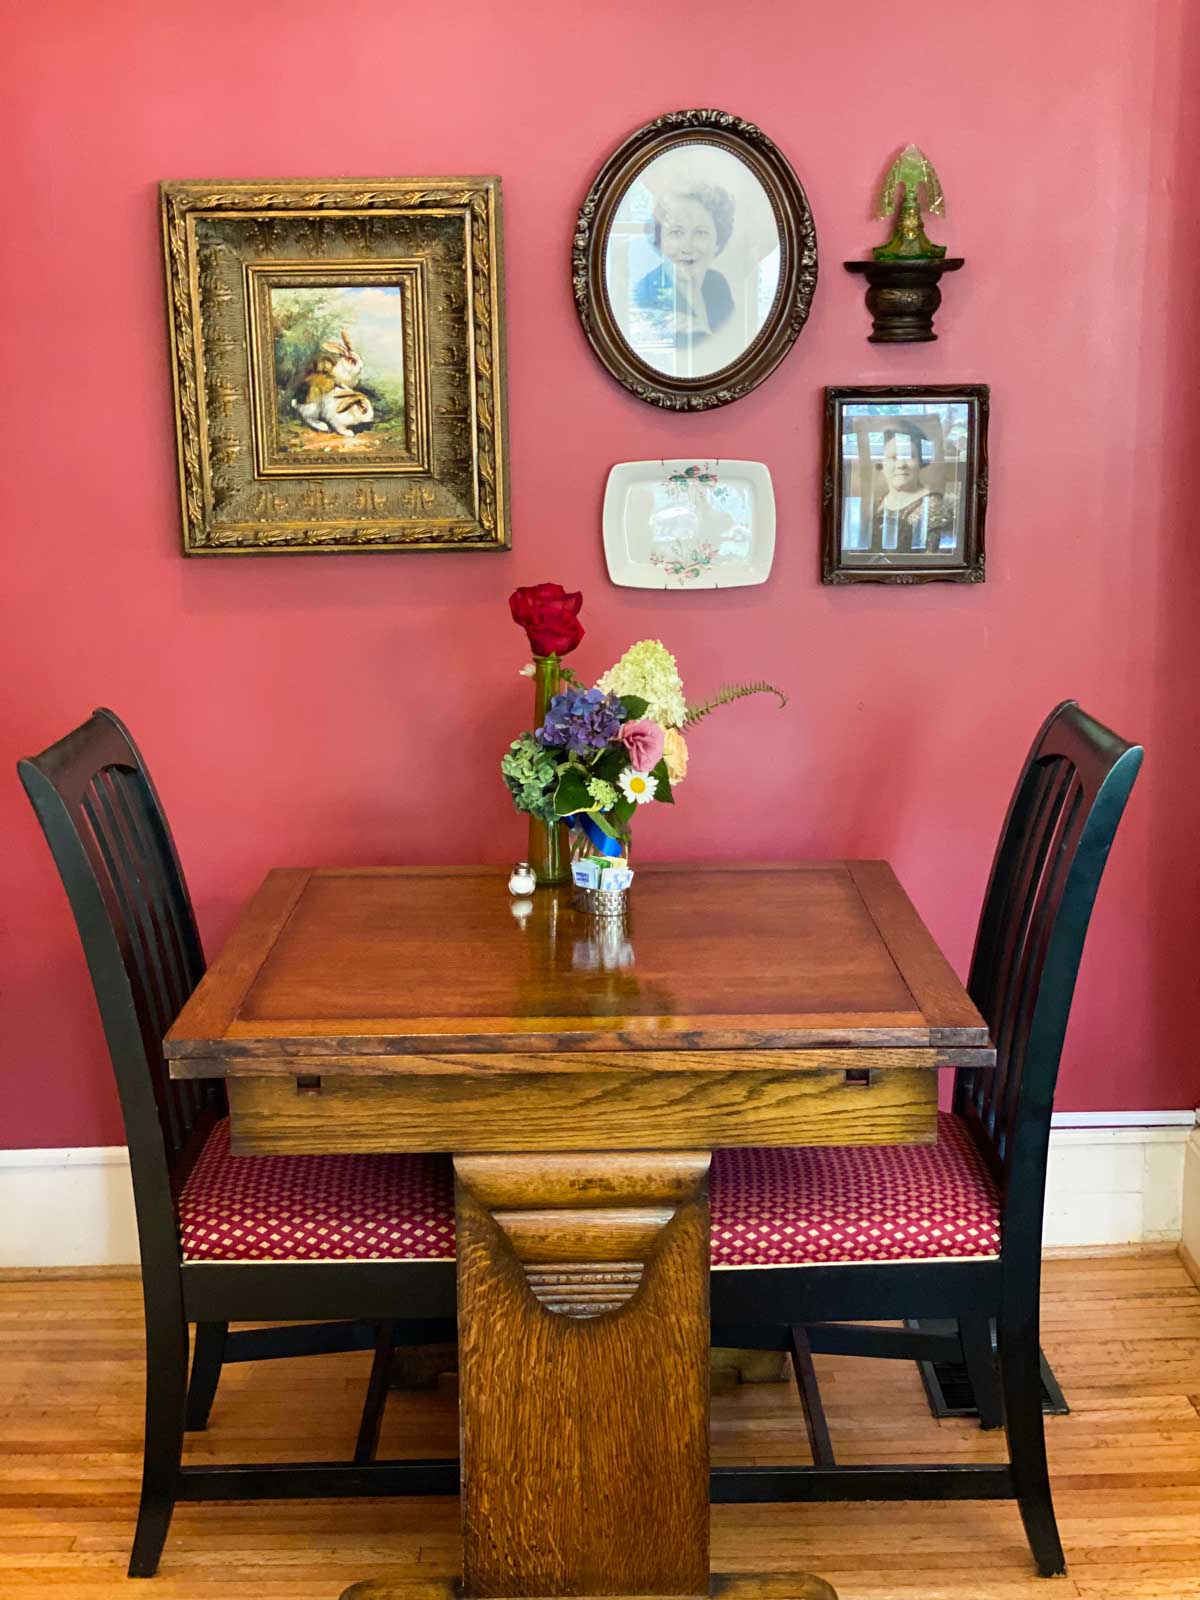 A table for two in the breakfast room.